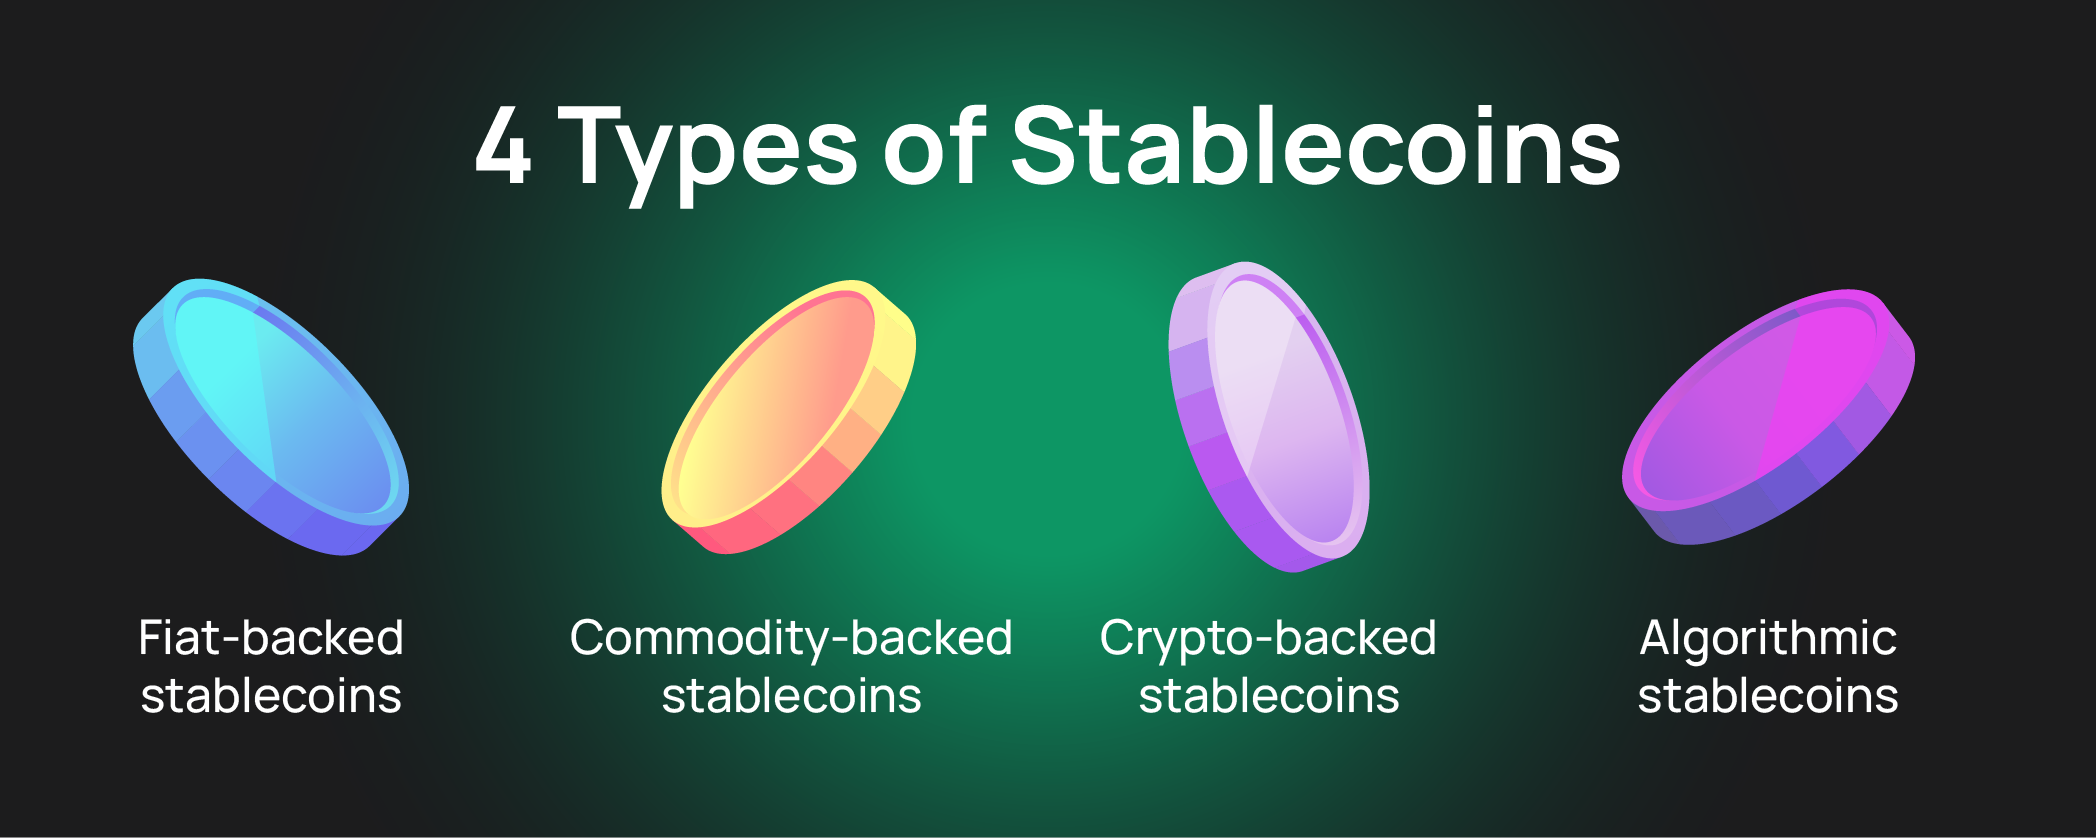 So what are the different types of stablecoins?